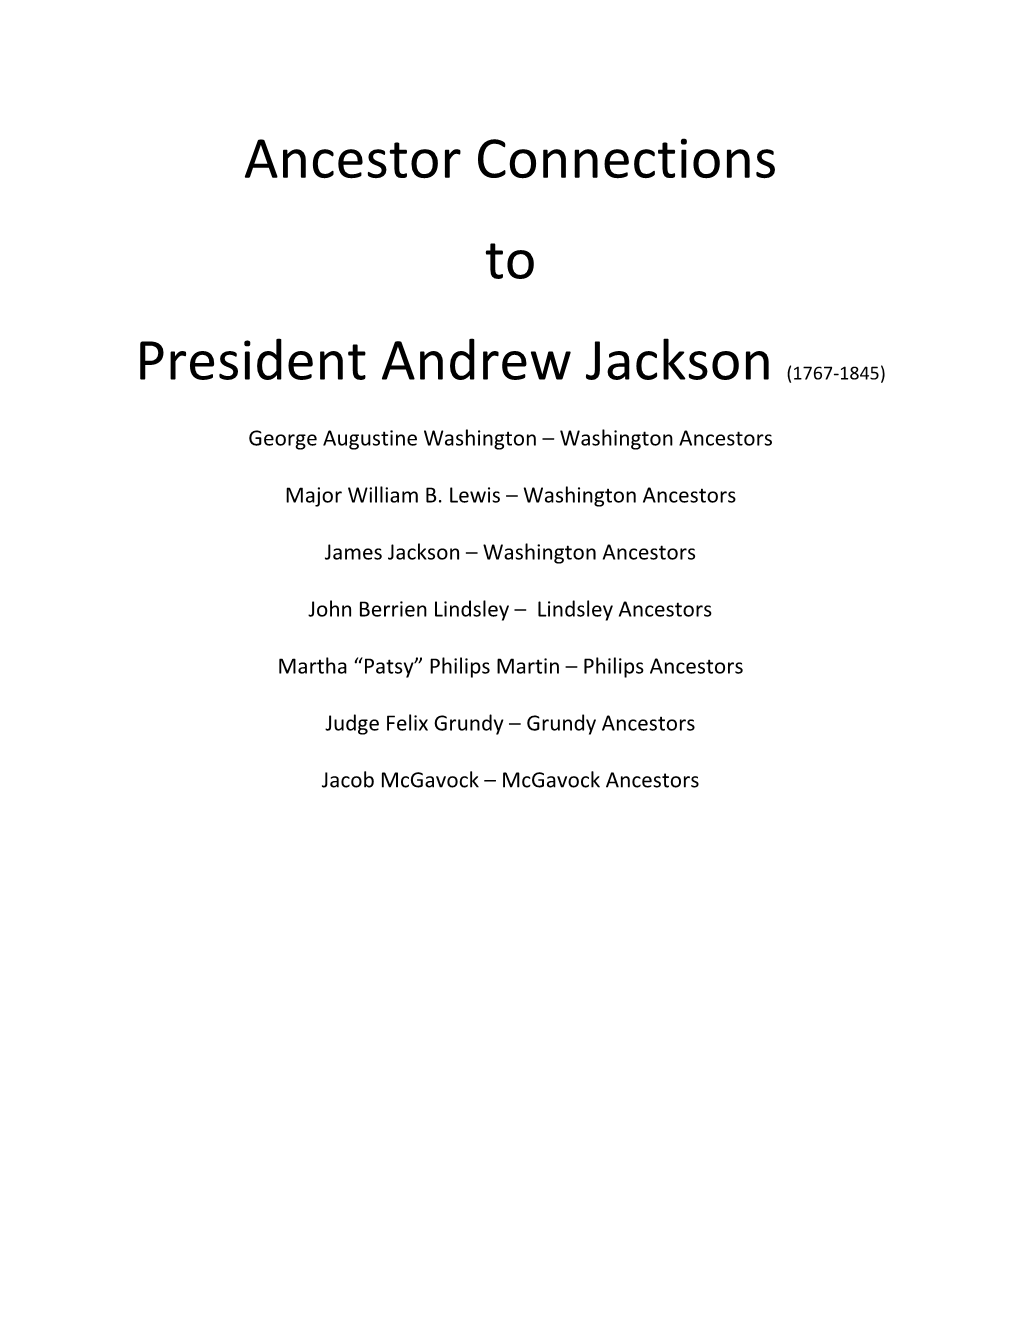 Ancestor Connections to President Andrew Jackson (1767-1845)